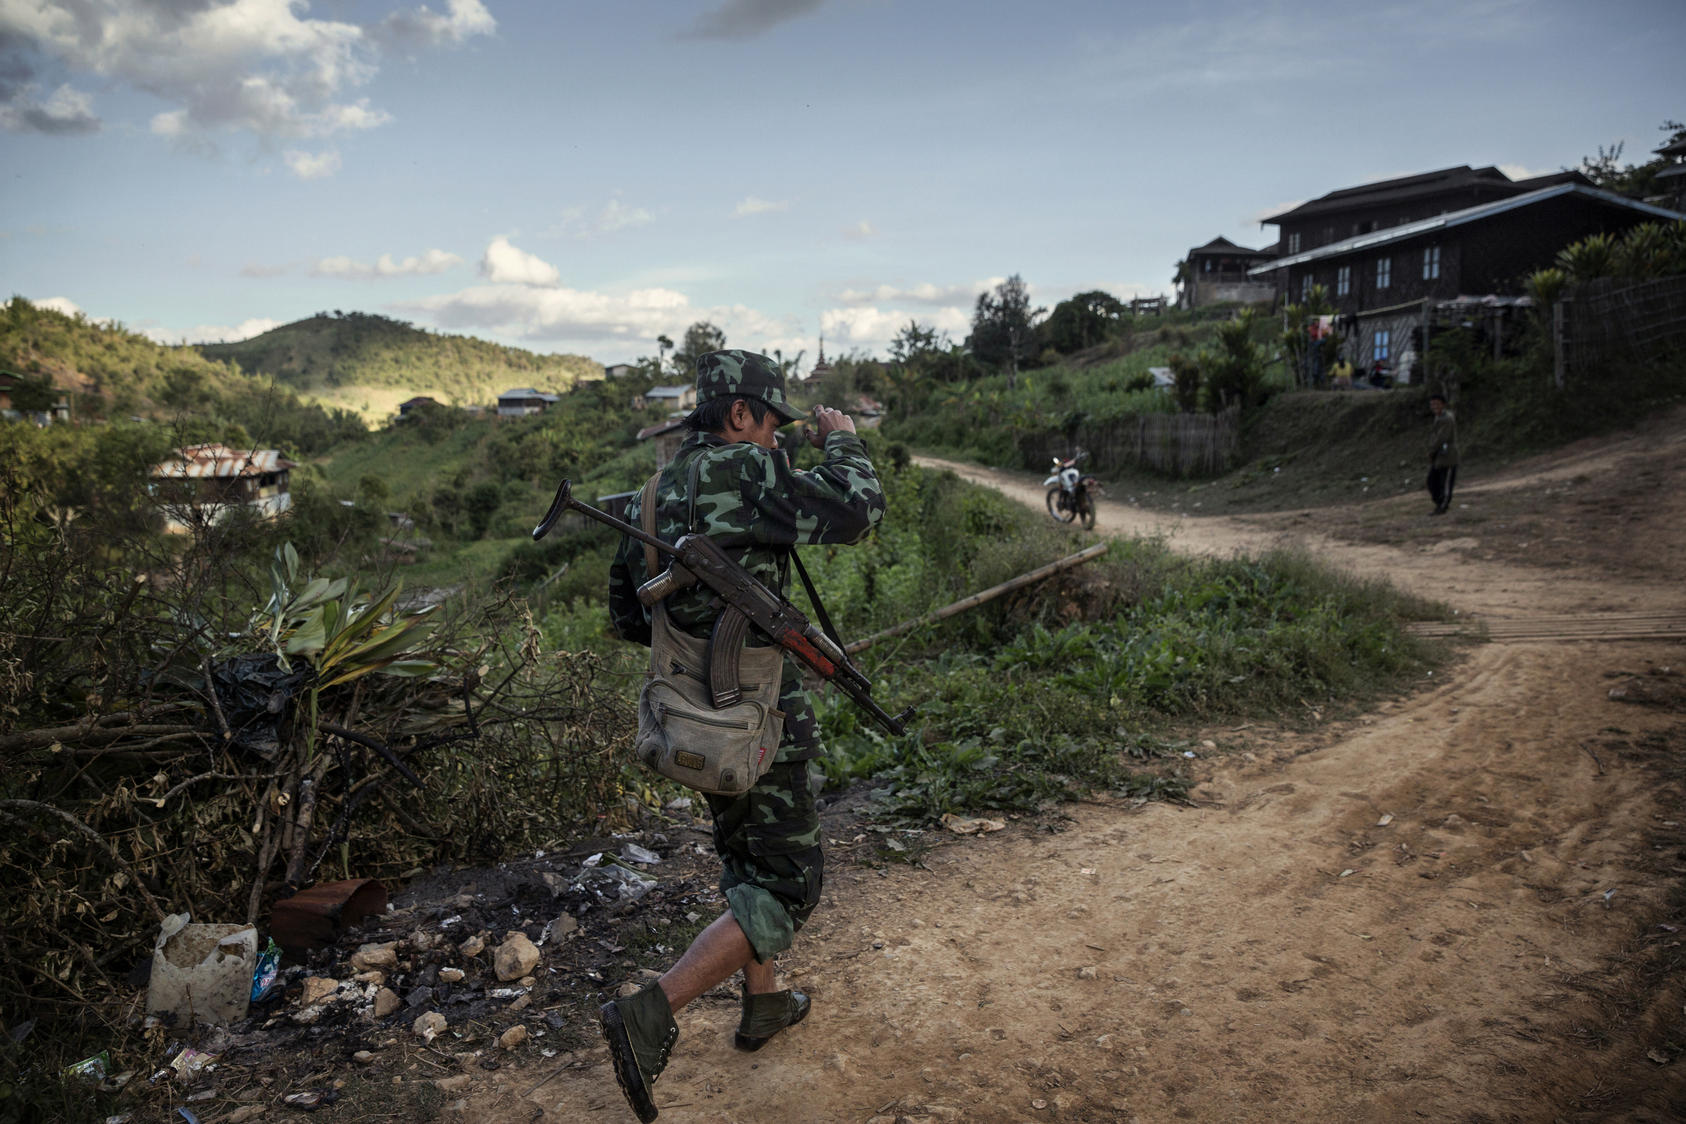 A Shan State Army - South rebel soldier walks through Bang Laem Village, Shan State, Myanmar, an area where poppy farming has flourished, Dec. 7, 2014. Growing opium poppies is illegal in Myanmar, but small-scale farmers see it is a relatively low-risk cash crop. 